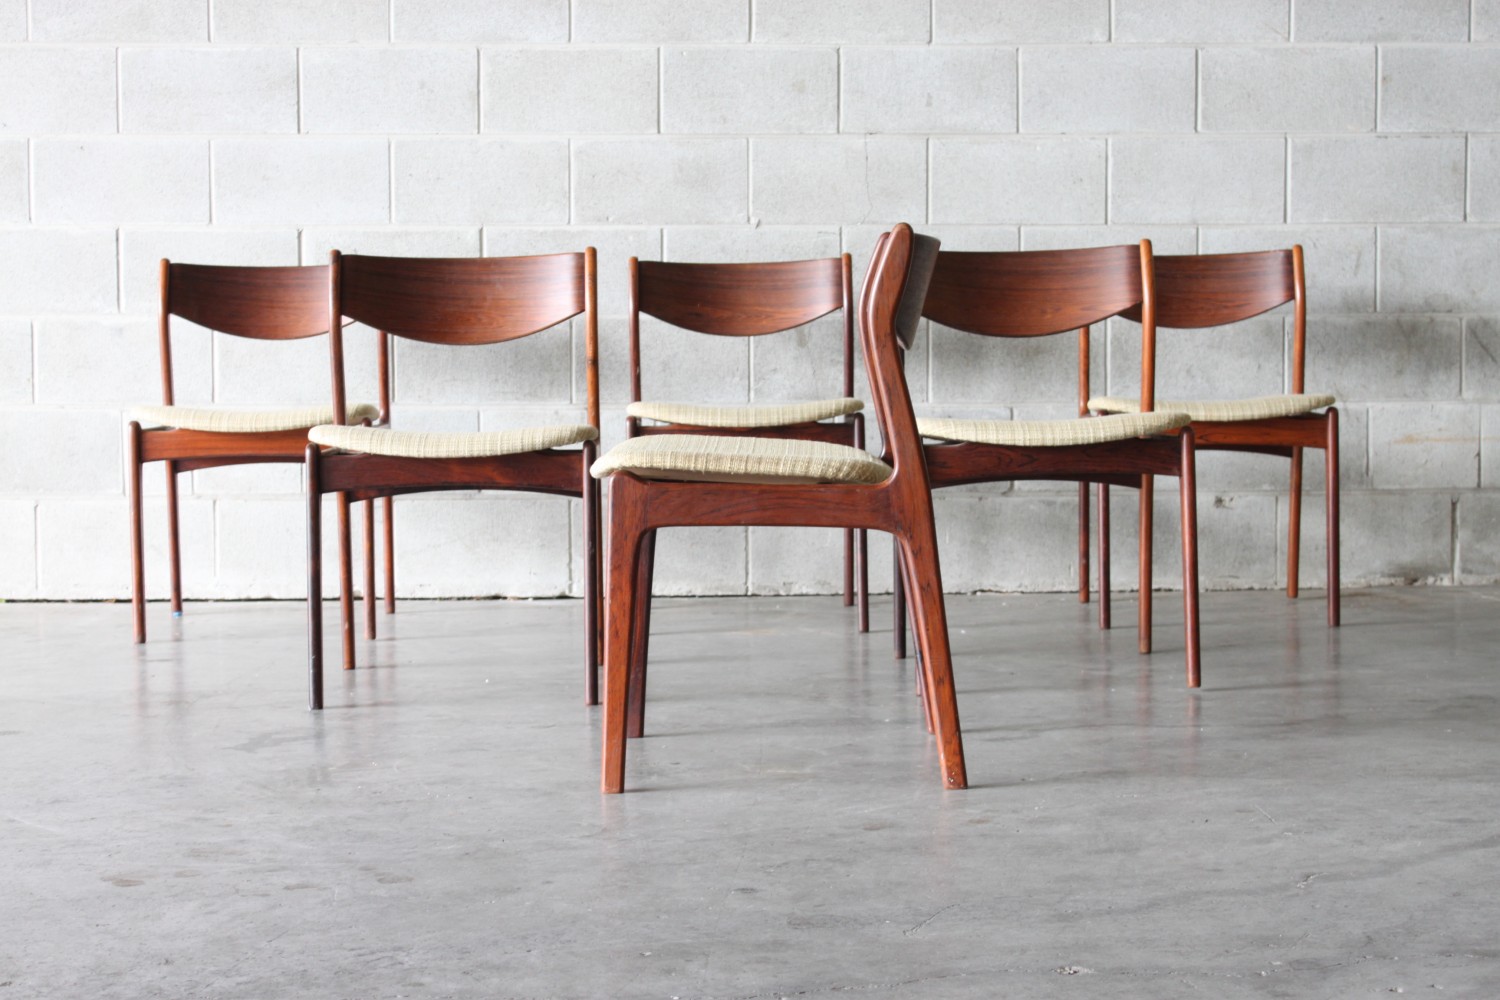 Rosewood Dining Chairs By P.E Jorgensen Sold